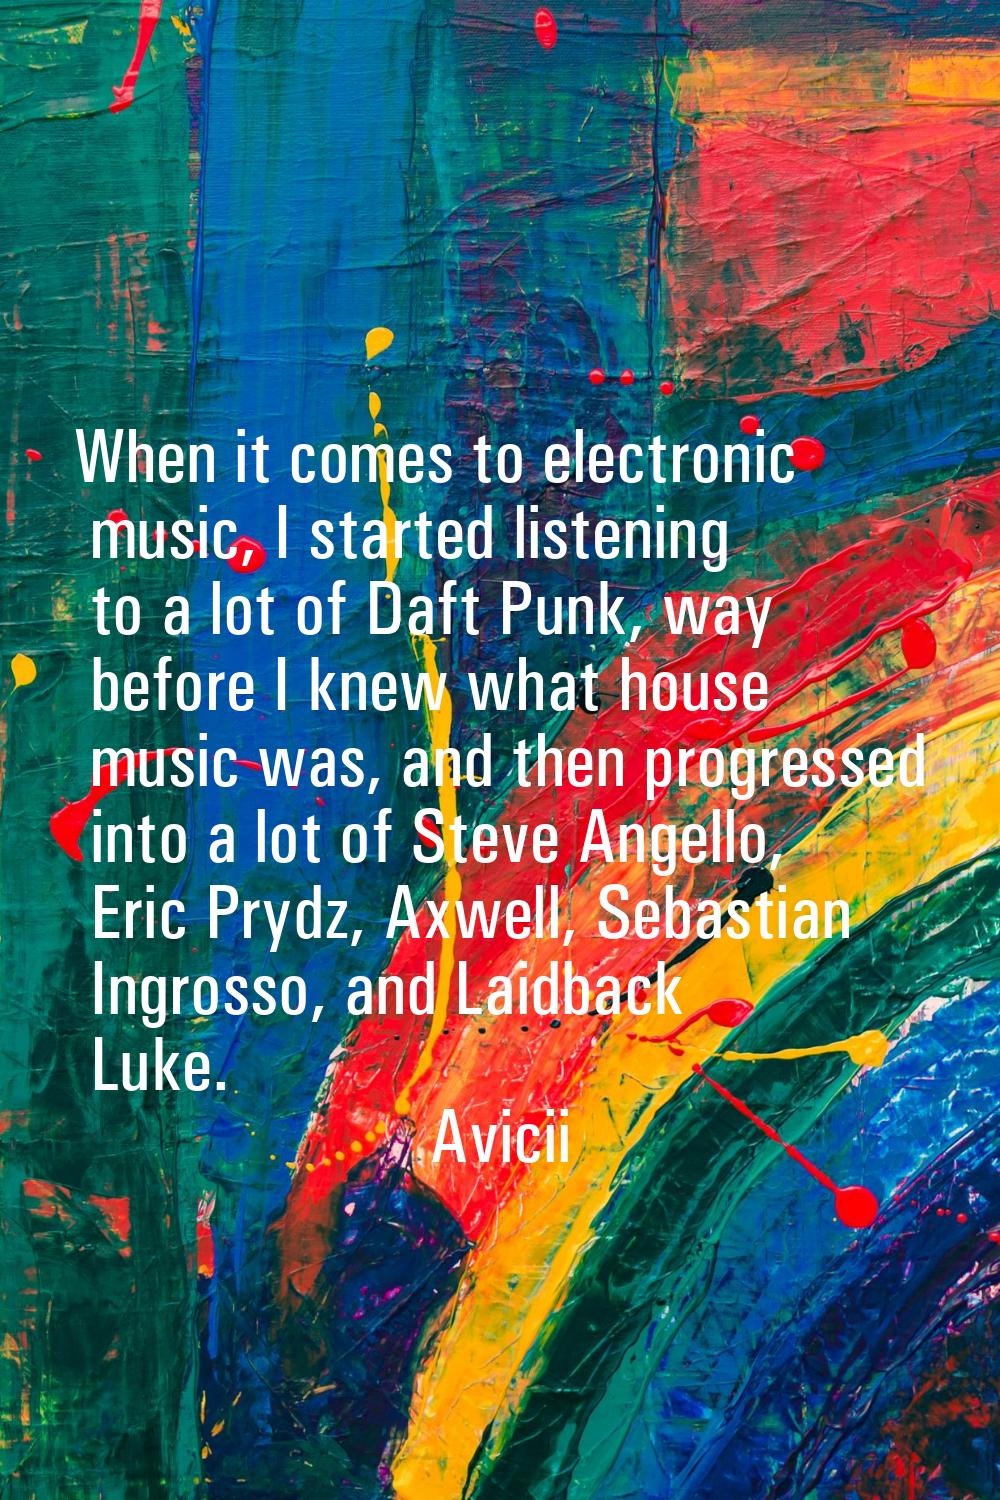 When it comes to electronic music, I started listening to a lot of Daft Punk, way before I knew wha